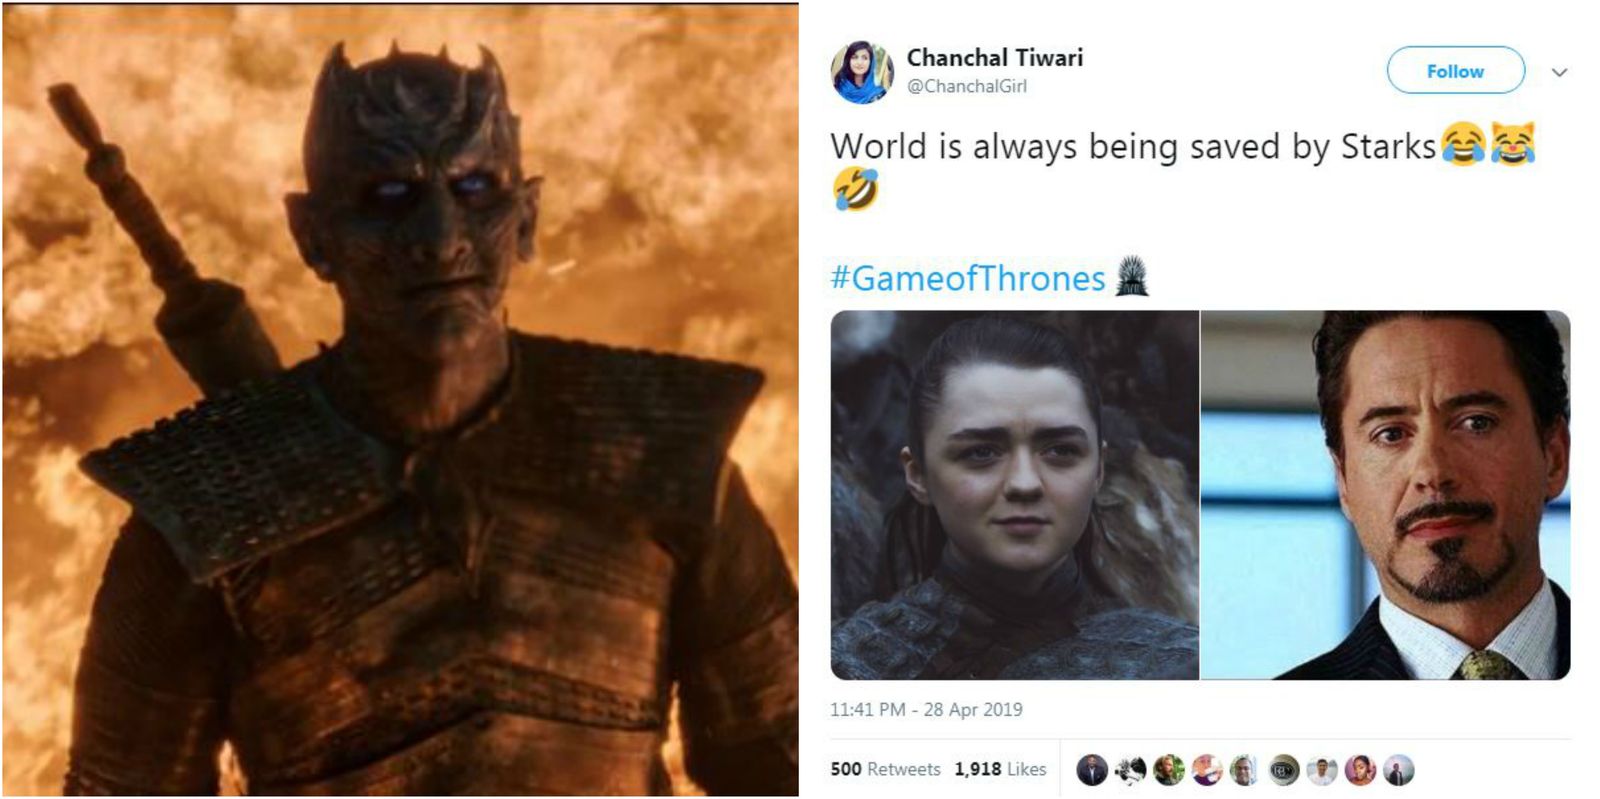 Nothing Will Ever Be As Epic As This Episode Of Game of Thrones, But These Hilarious Tweets Come Close